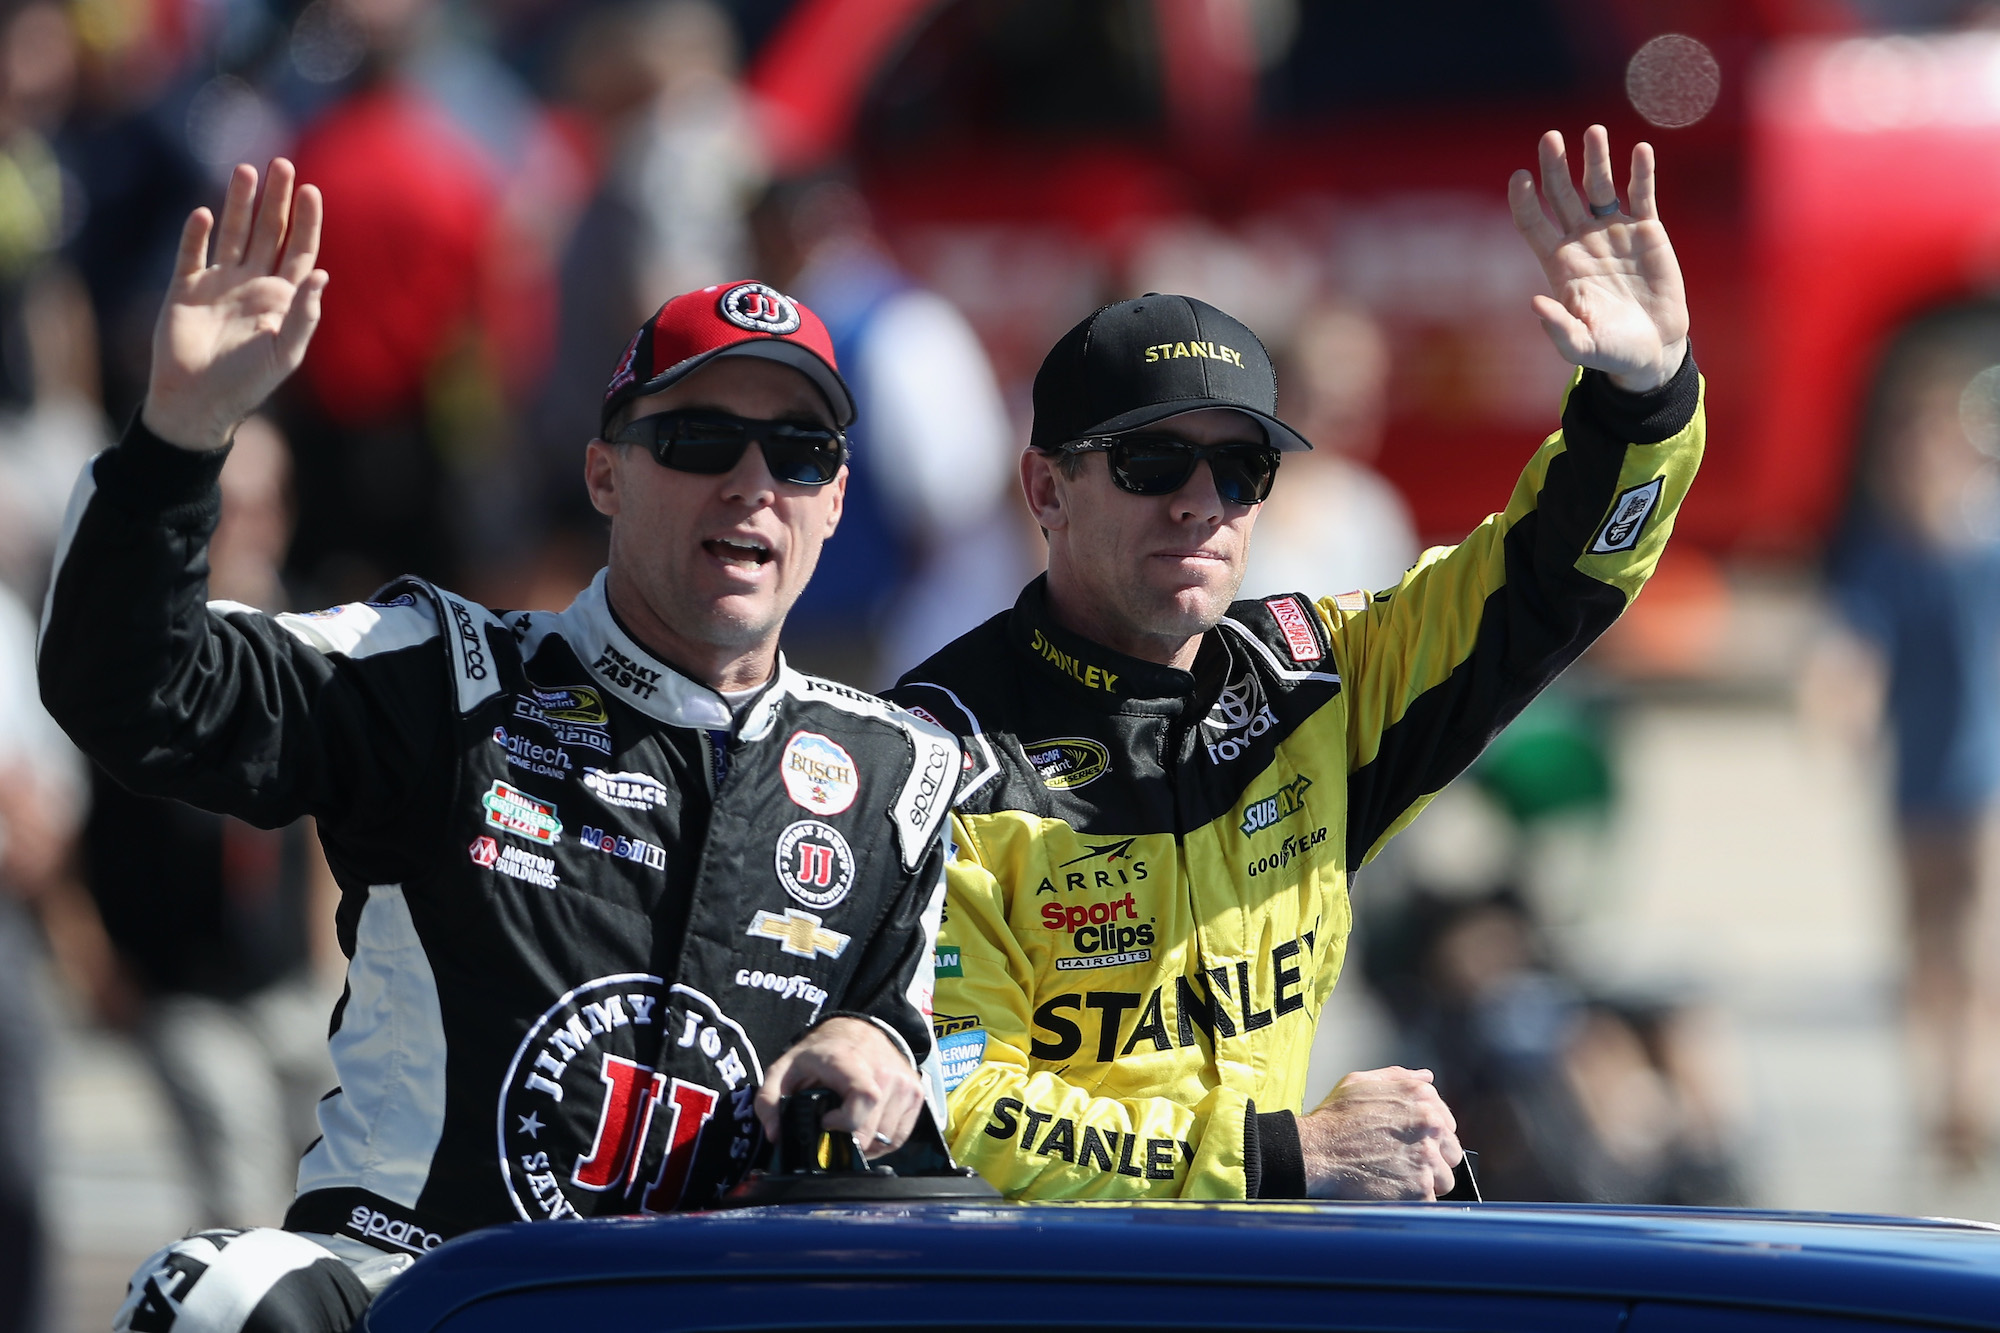 Kevin Harvick and Carl Edwards ride together